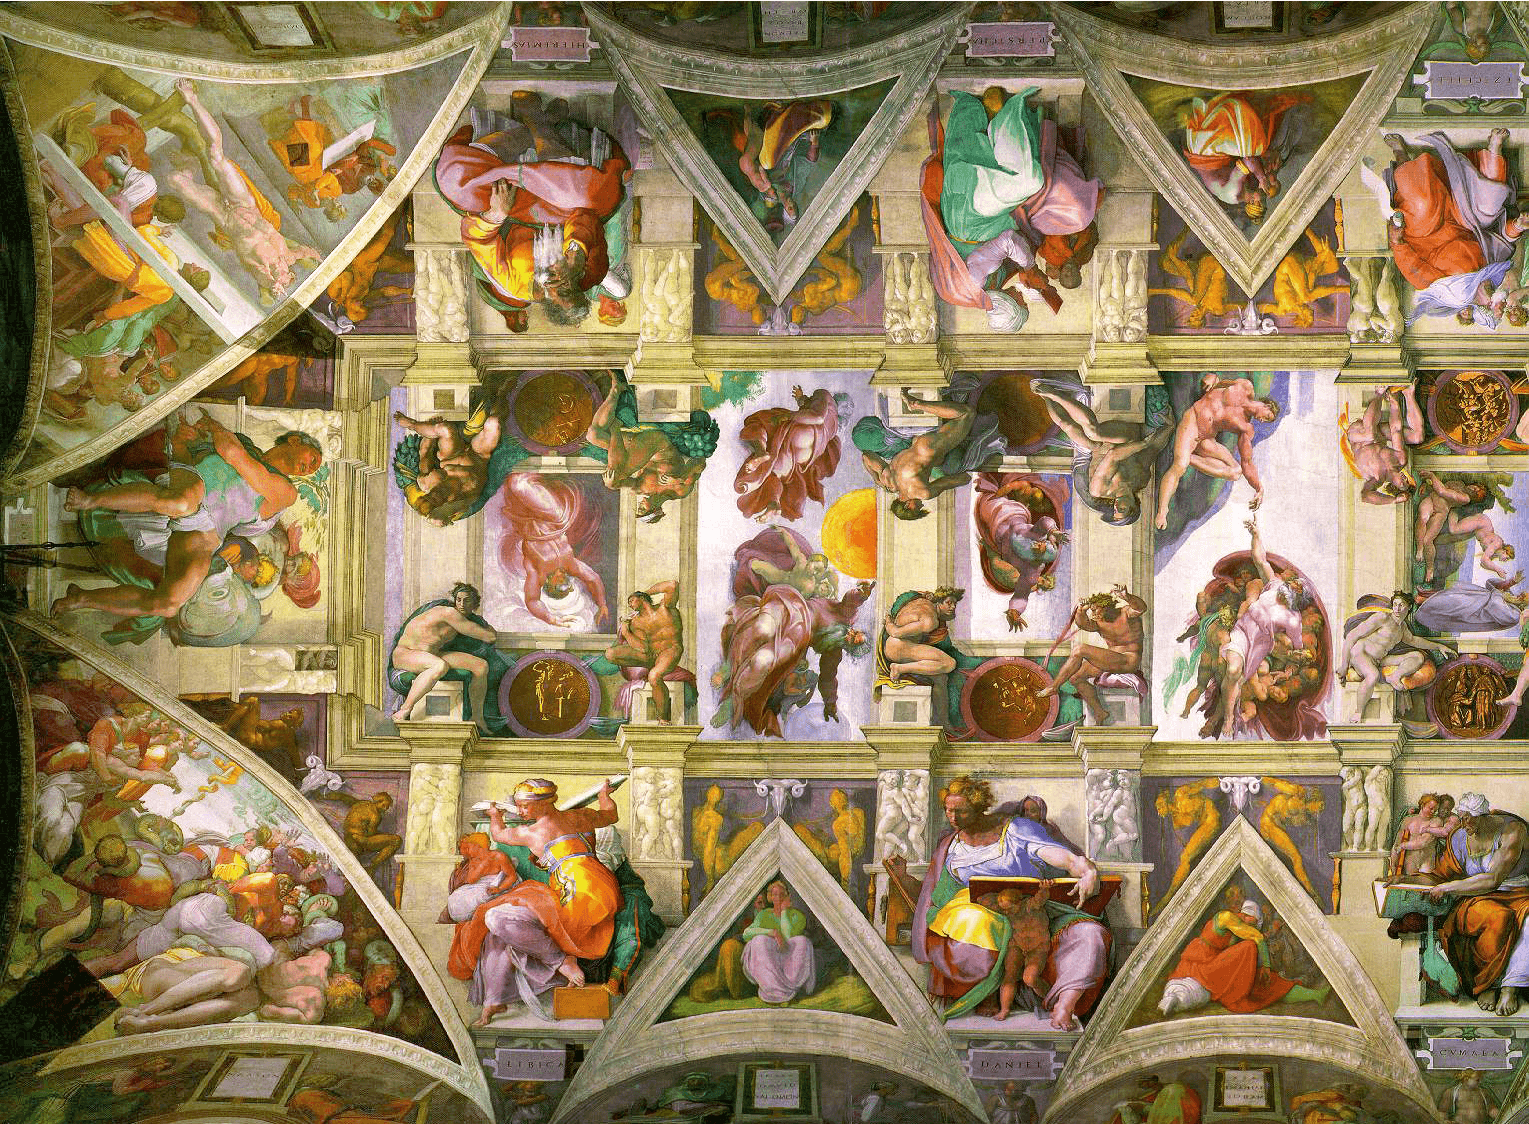 The Agony and the Ecstasy: Michelangelo's Sistine Chapel ceiling